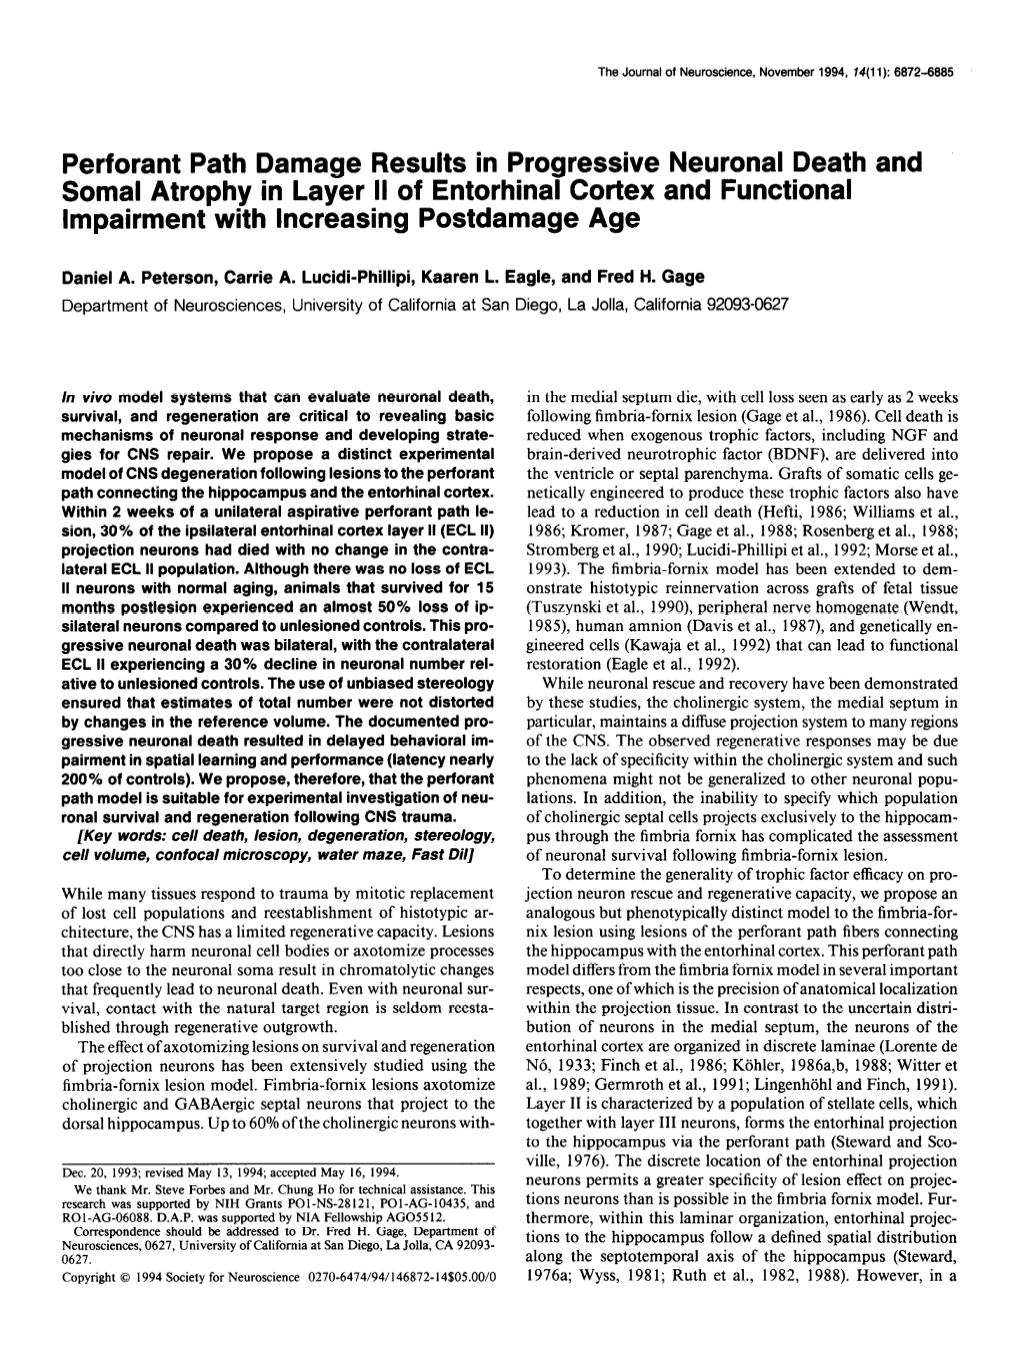 Perforant Path Damage Results in Progressive Neuronal Death and Somal Atrophy in Layer II of Entorhinal Cortex and Functional Im